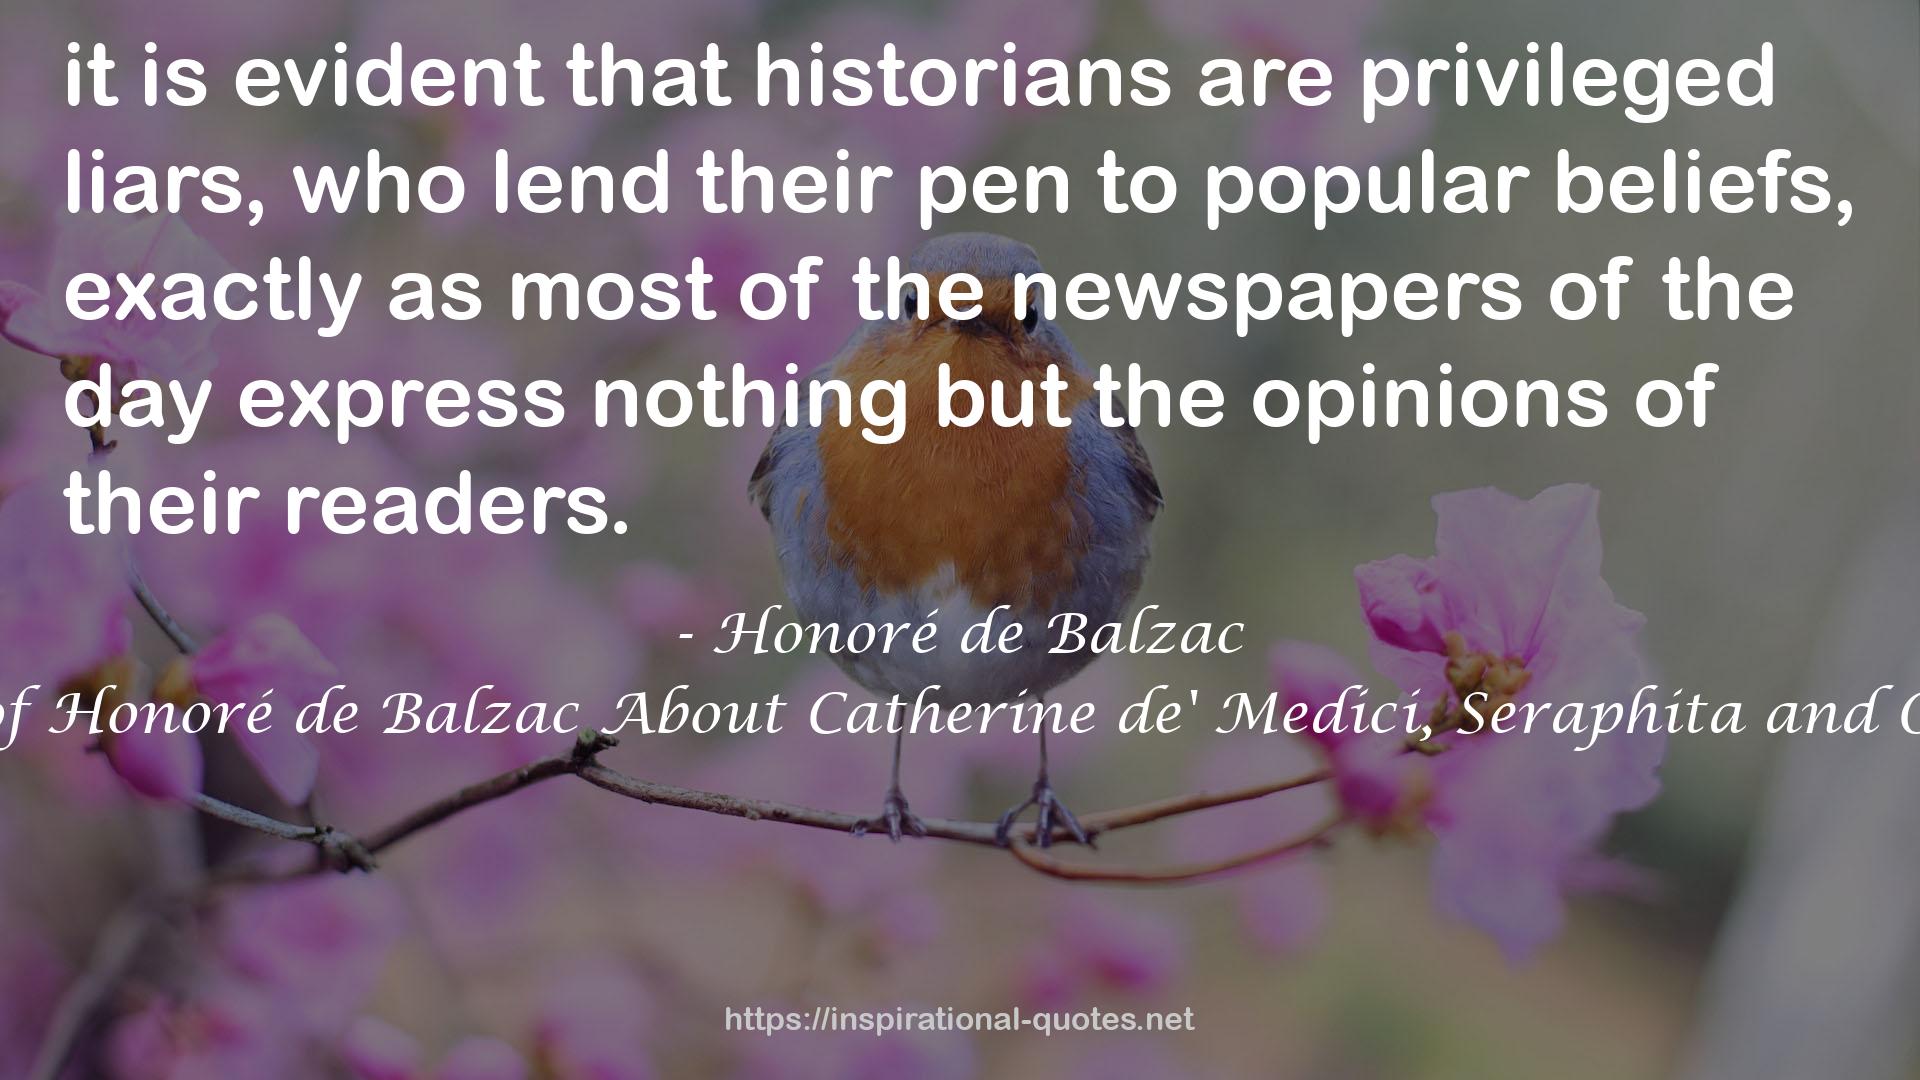 The Works of Honoré de Balzac About Catherine de' Medici, Seraphita and Other Stories QUOTES